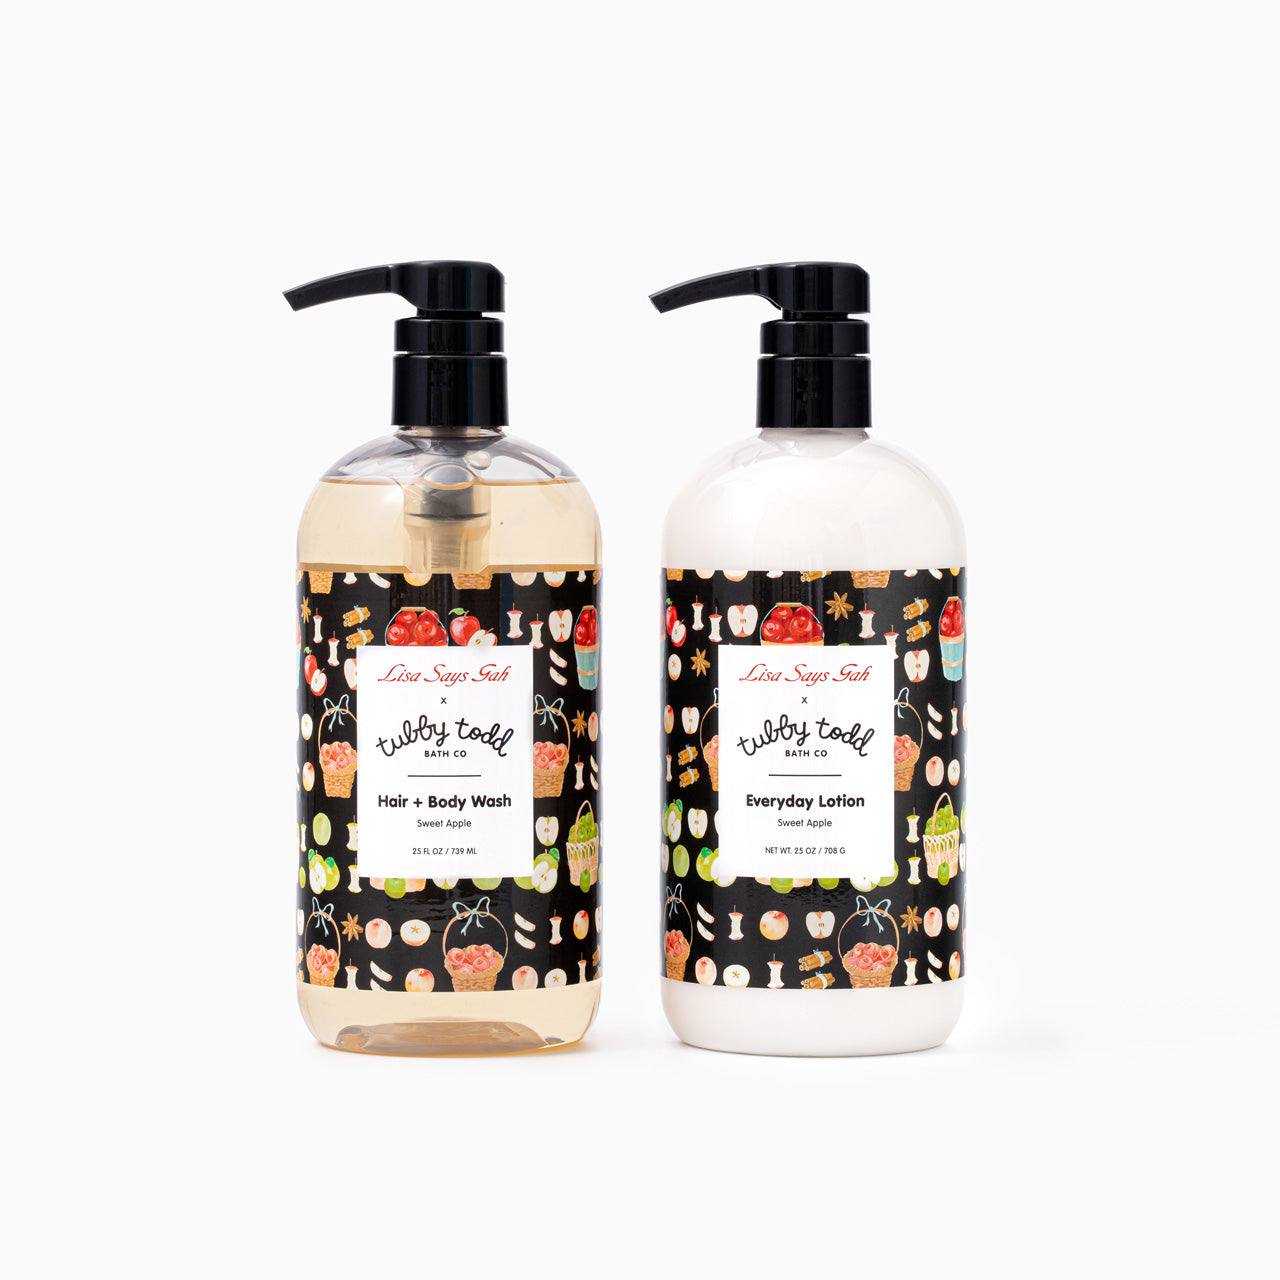 Sweet Apple Hair & Body Wash and Everyday Lotion bottles